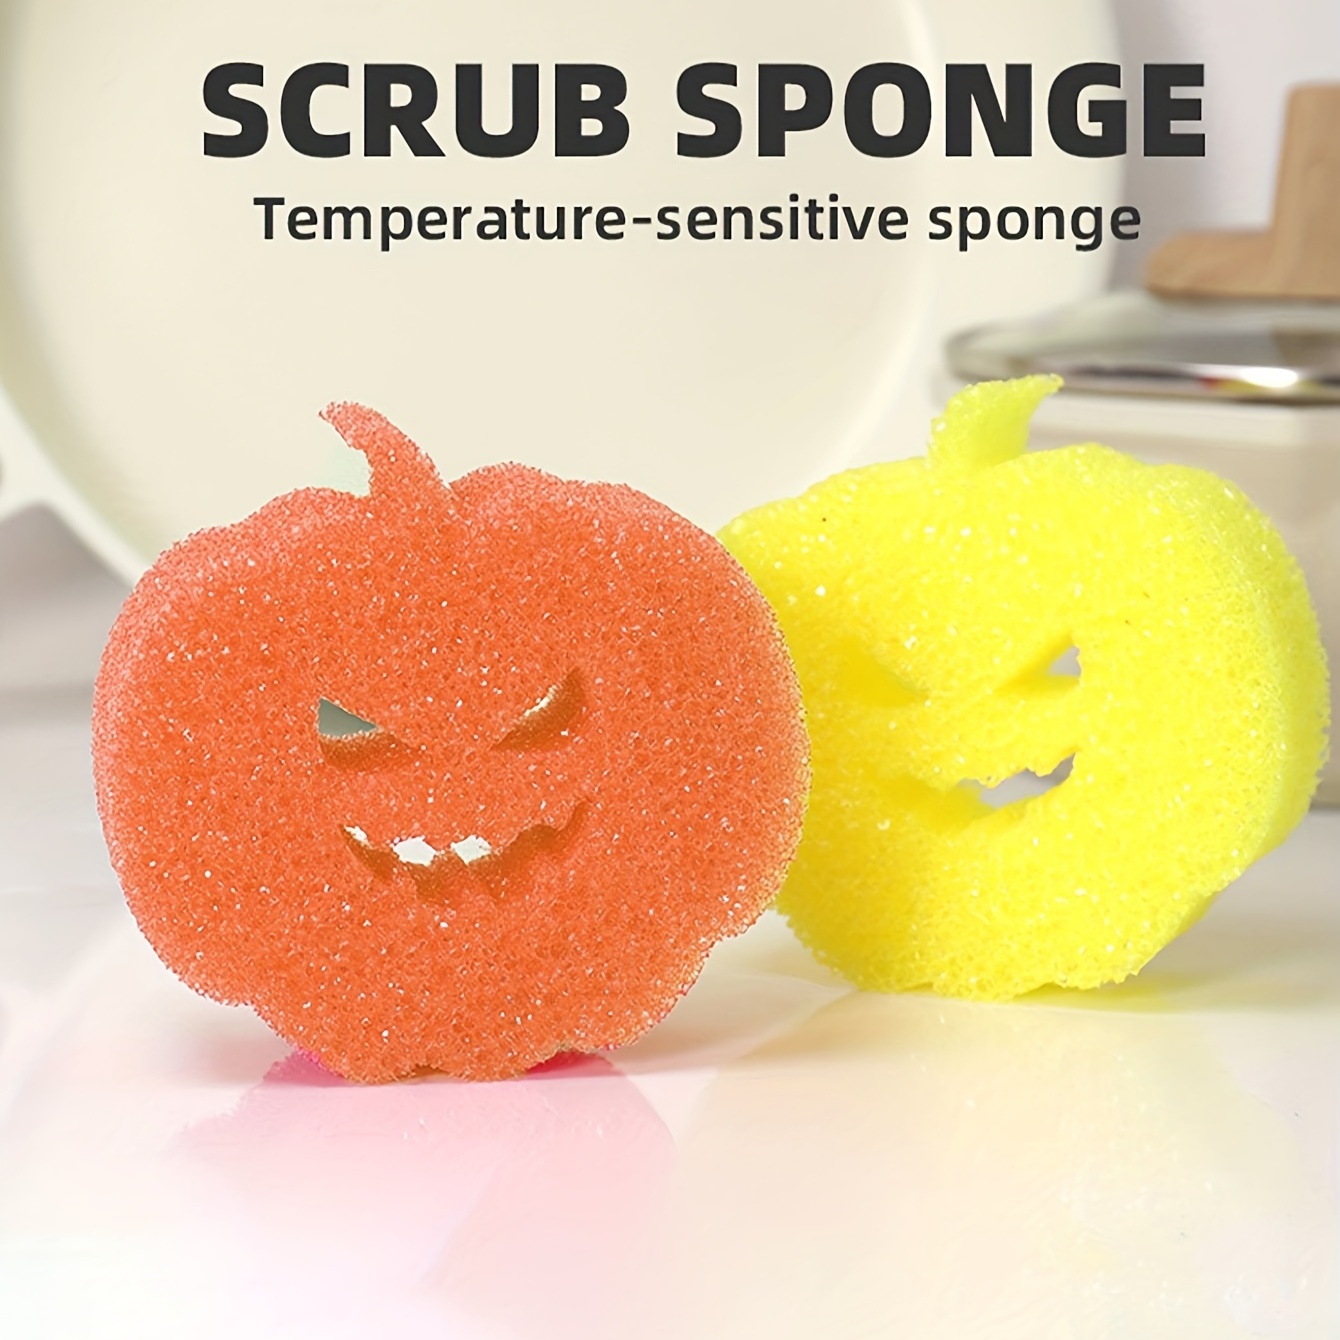 Scrub Daddy Halloween sponges will clean anything and add festive touch